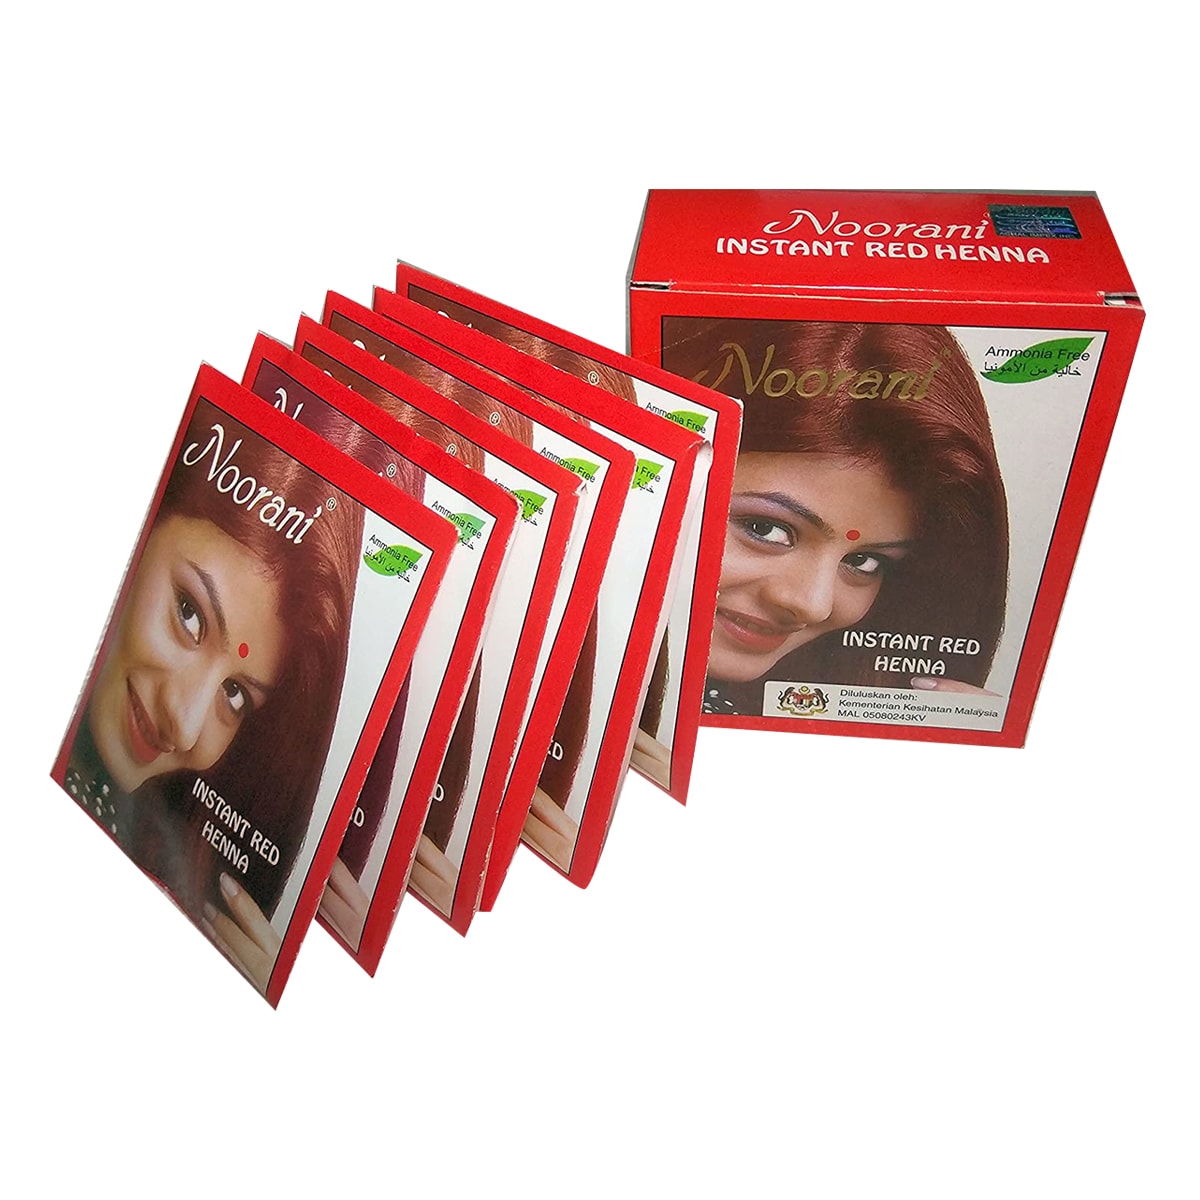 Buy Noorani Instant Red Henna (6 Packets 10 gm Each) - 6 Packet